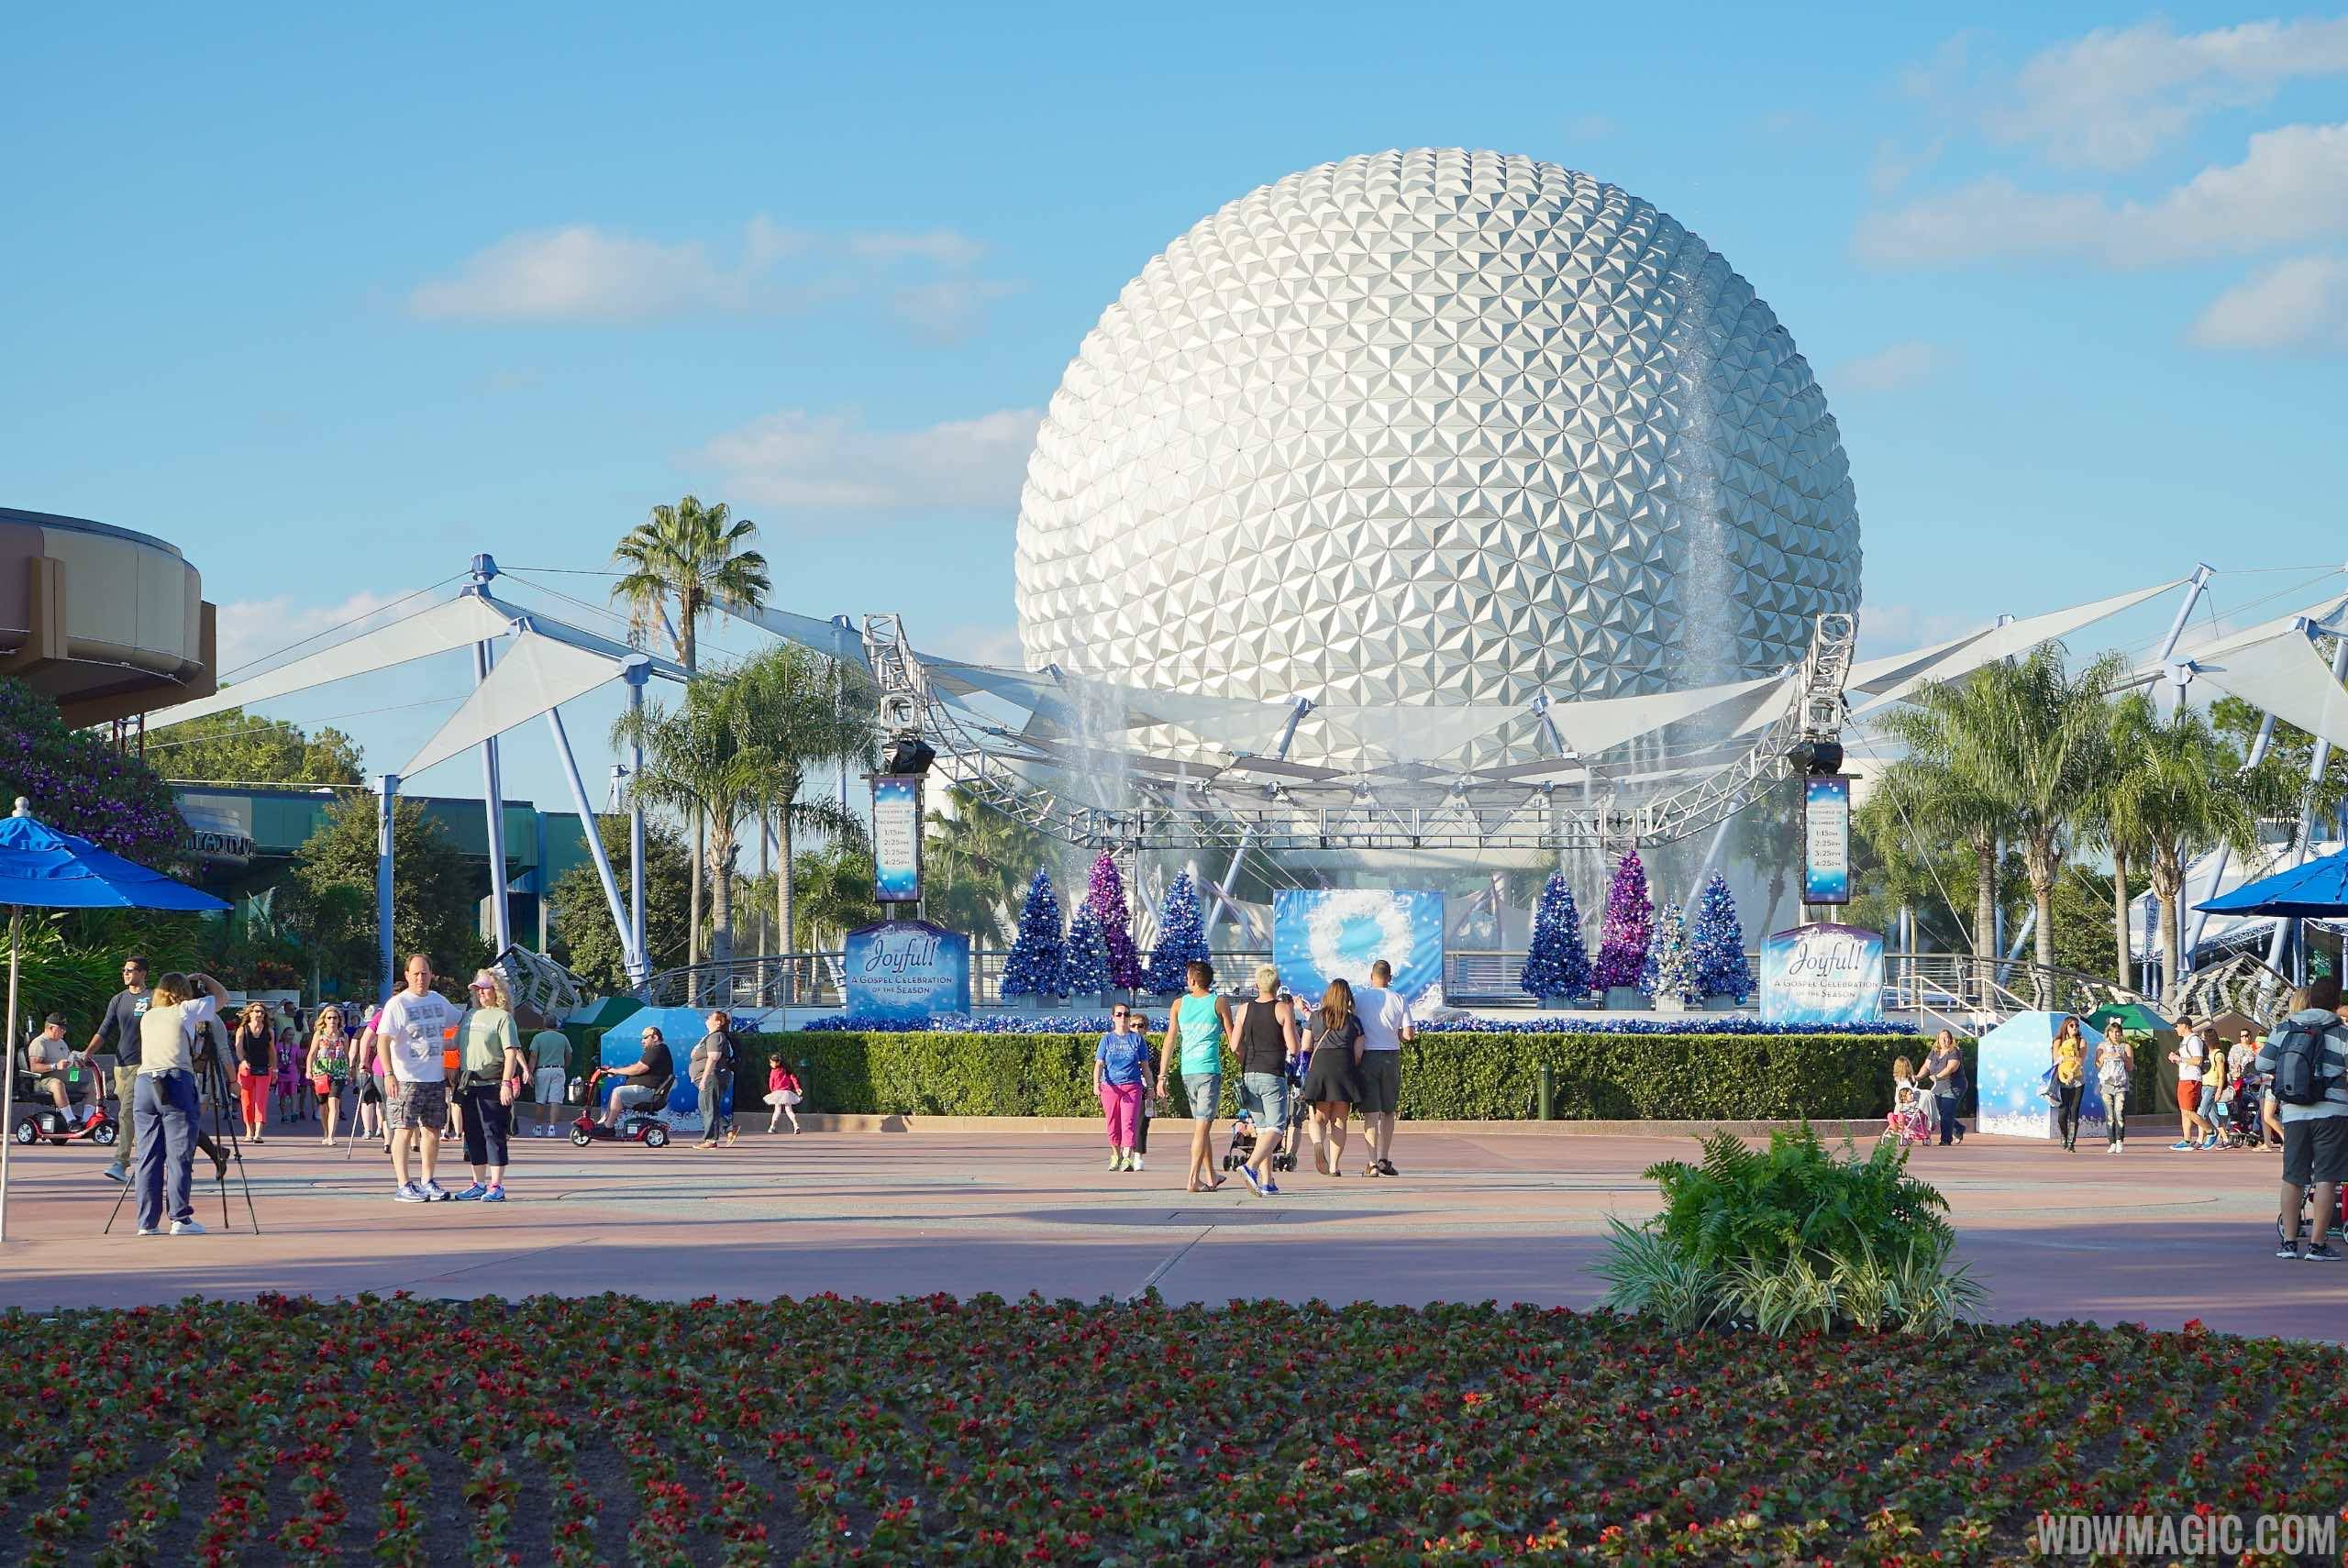 PHOTOS - Epcot's holiday decorations are now in place